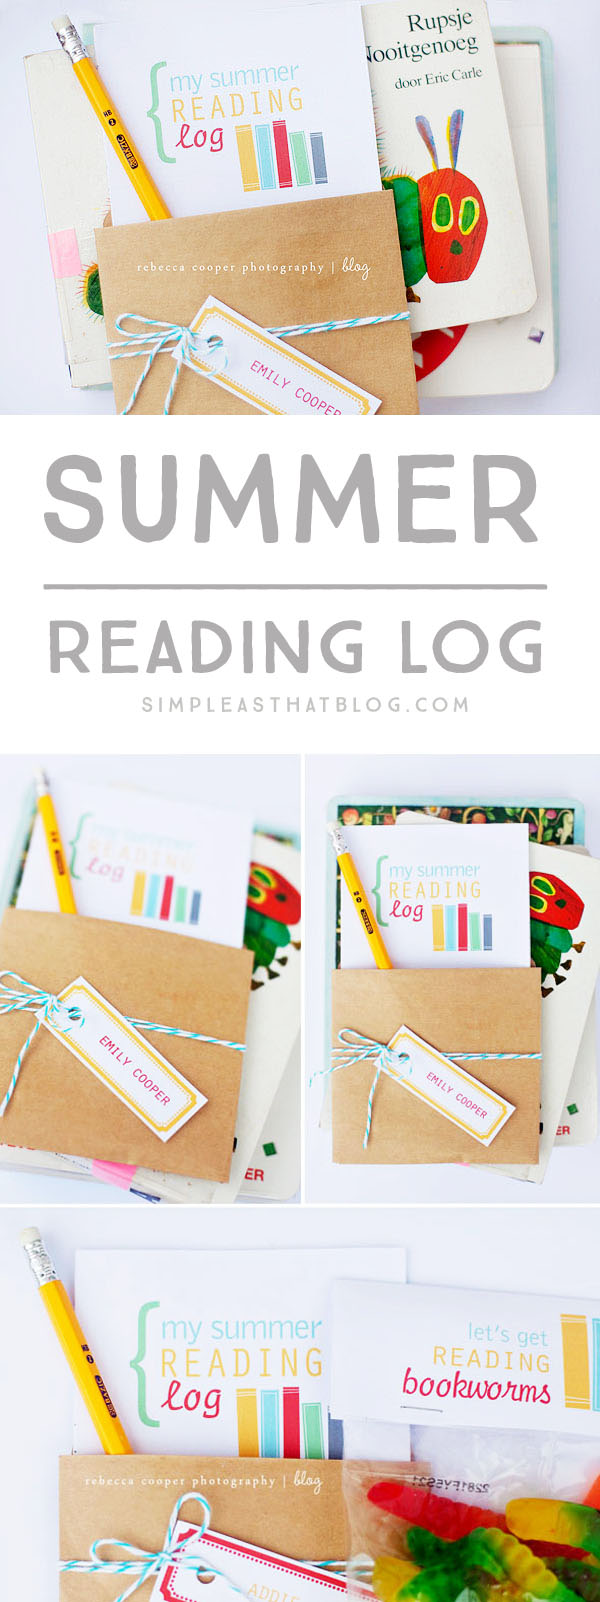 Free printables to encourage Summer reading and make it fun!